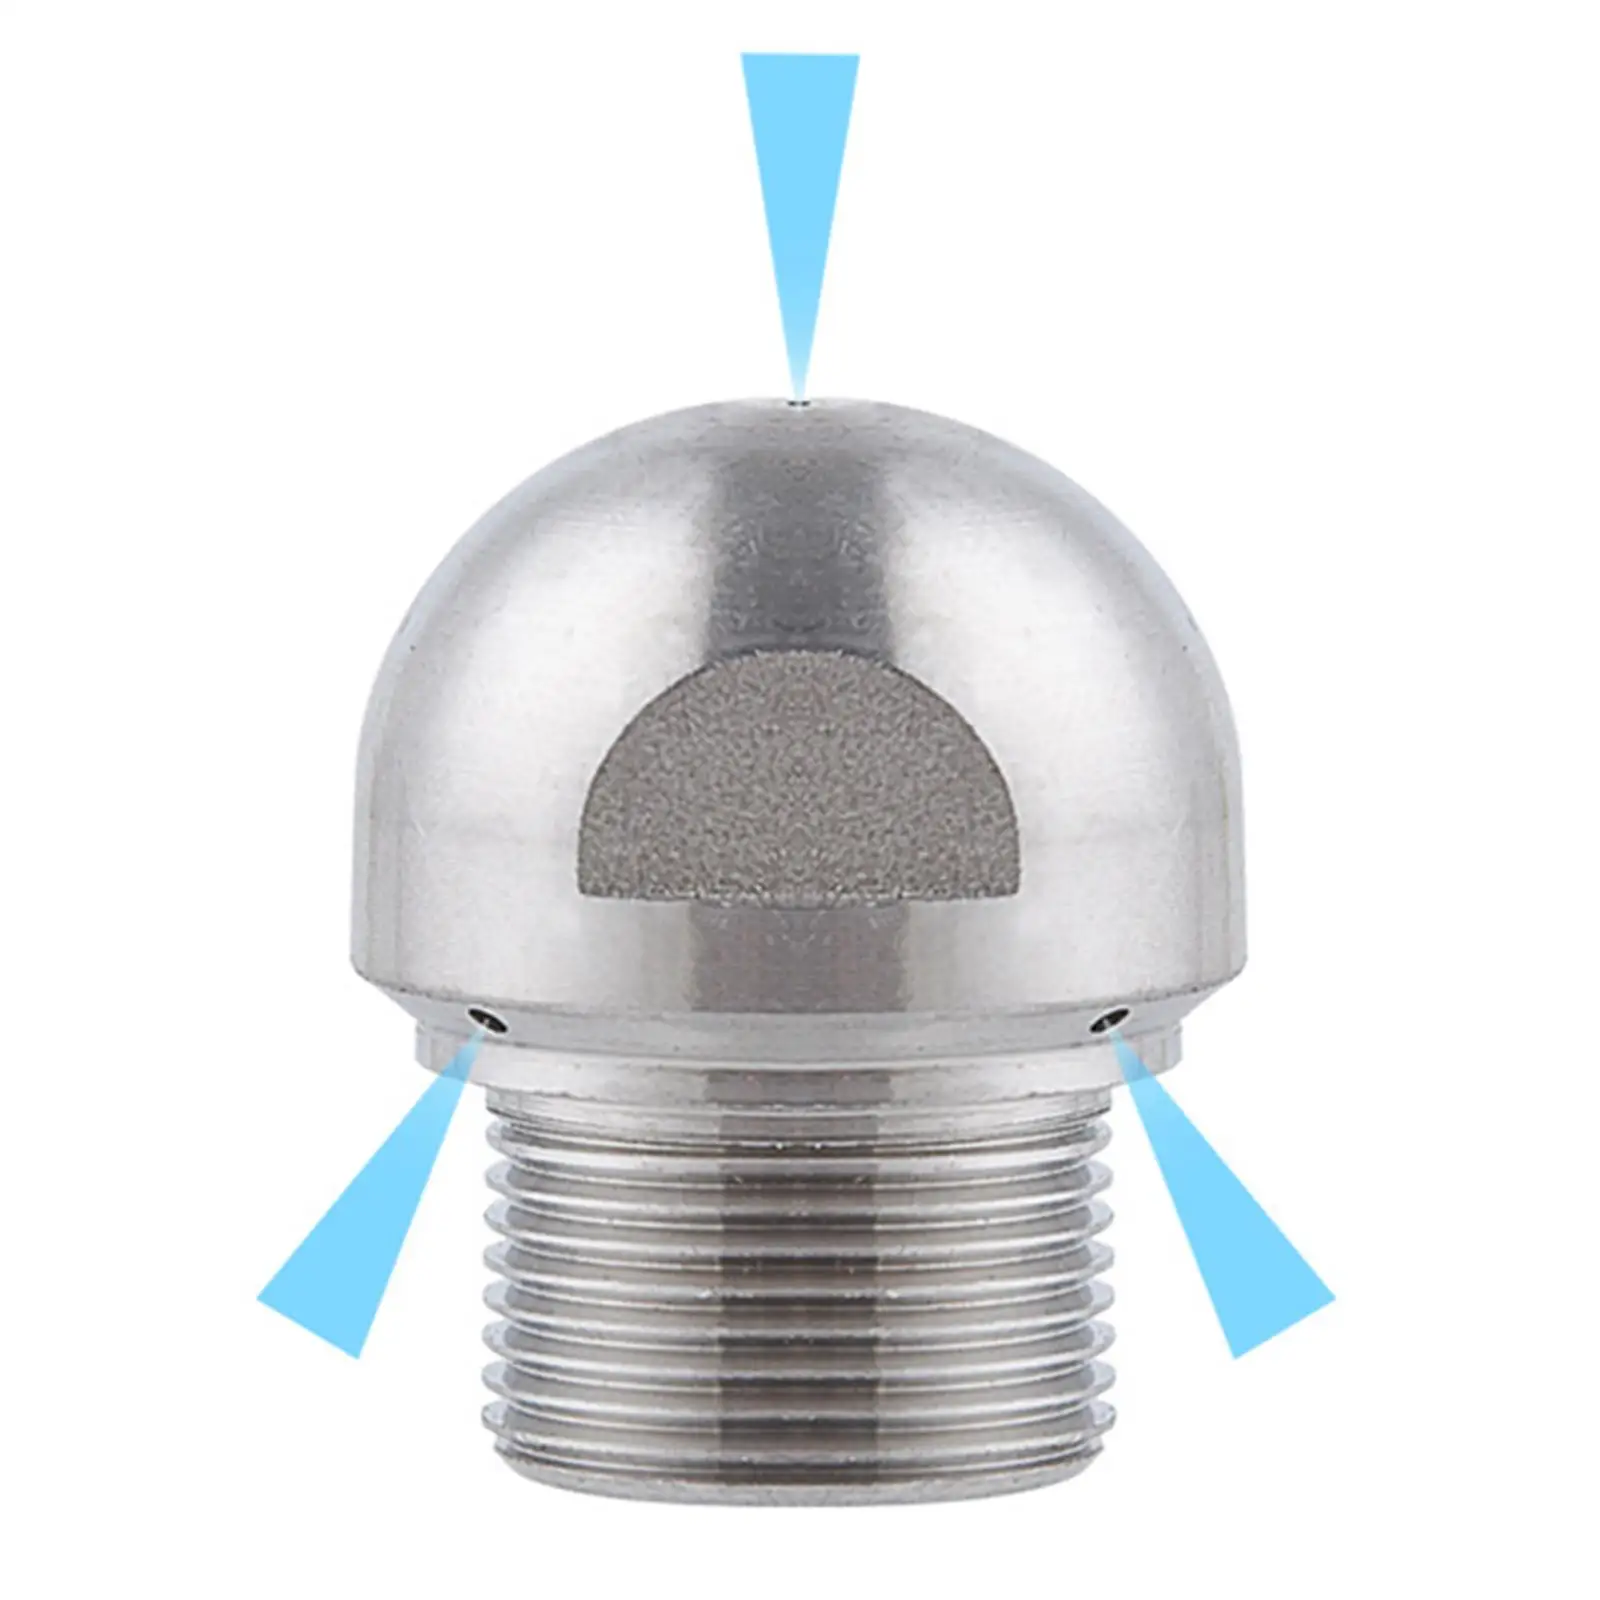 1/4 inch Stainless Steel Fixed Sewer Nozzle Button Nose Sewer Jetting Nozzle for Pressure Washer Accessories Drain Jetting Hose